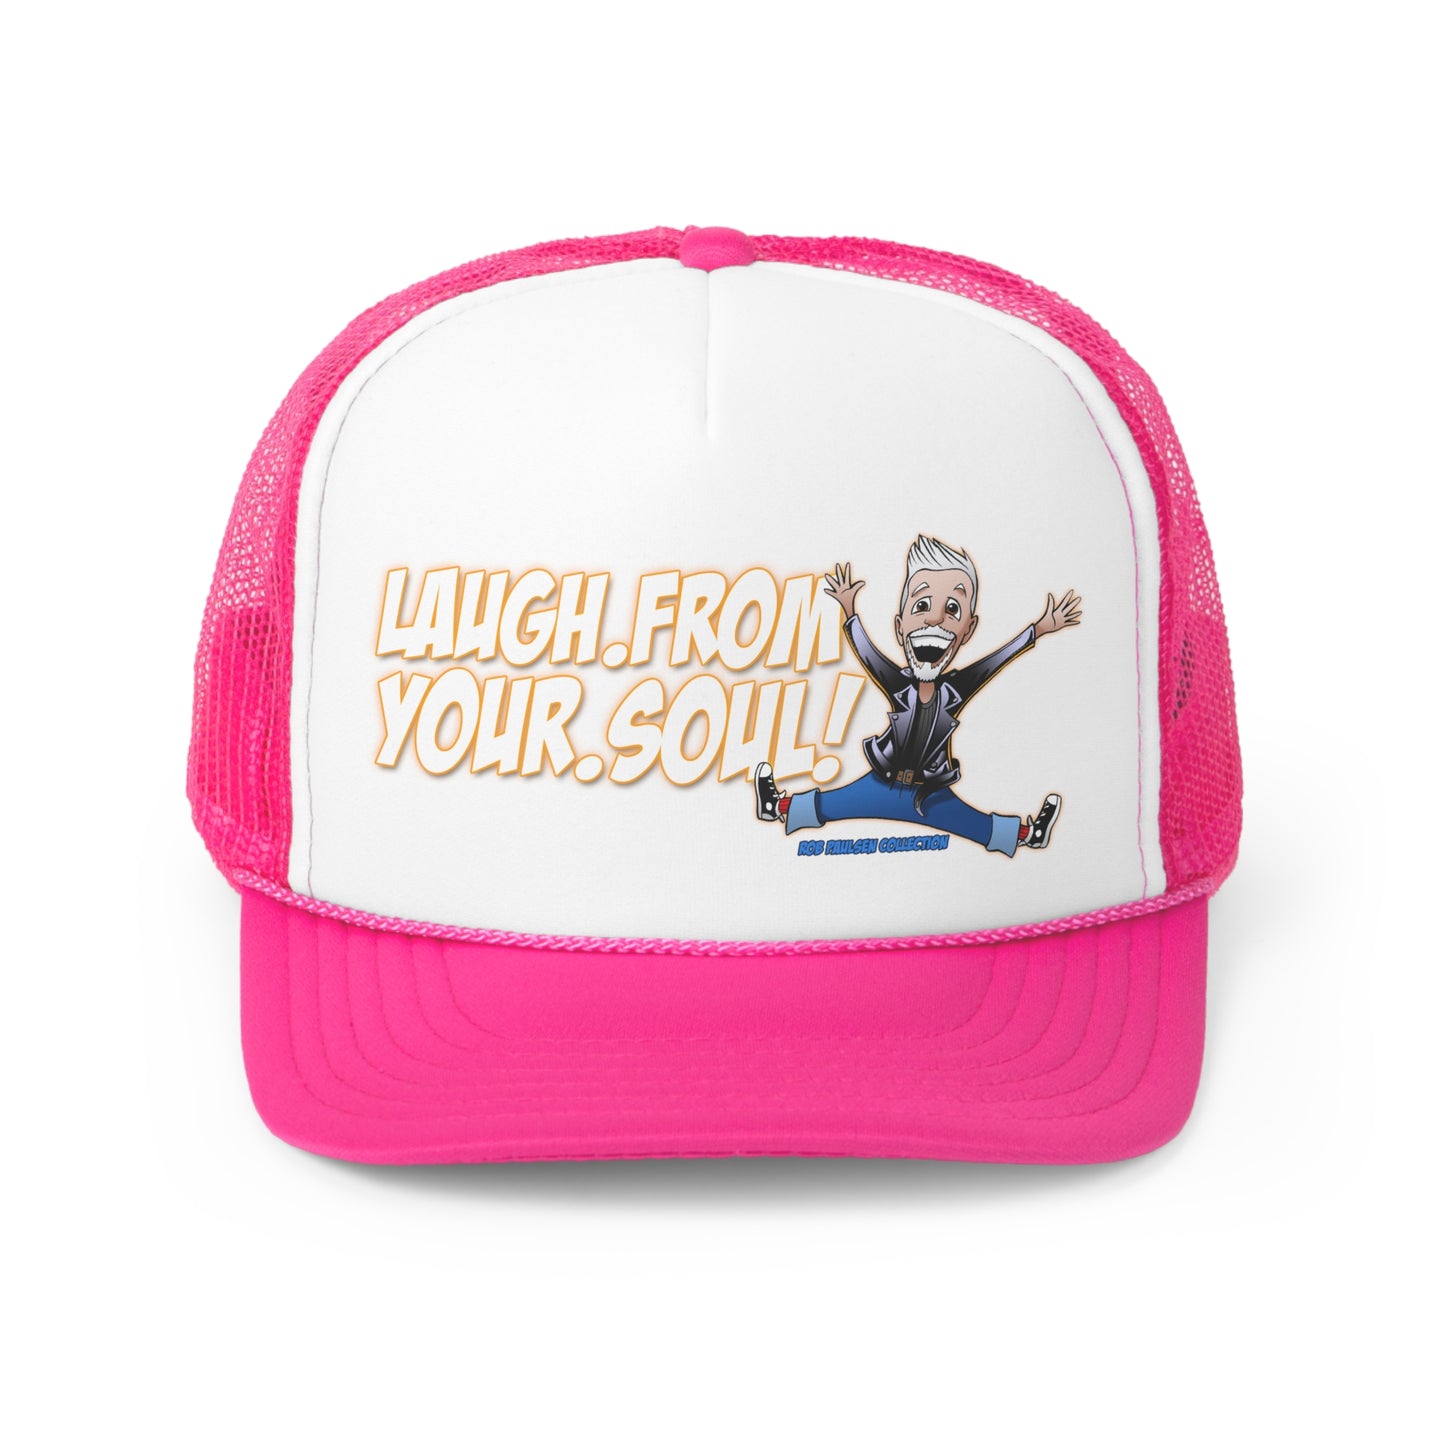 Rob Paulsen LAUGH FROM YOUR SOUL Trucker Caps